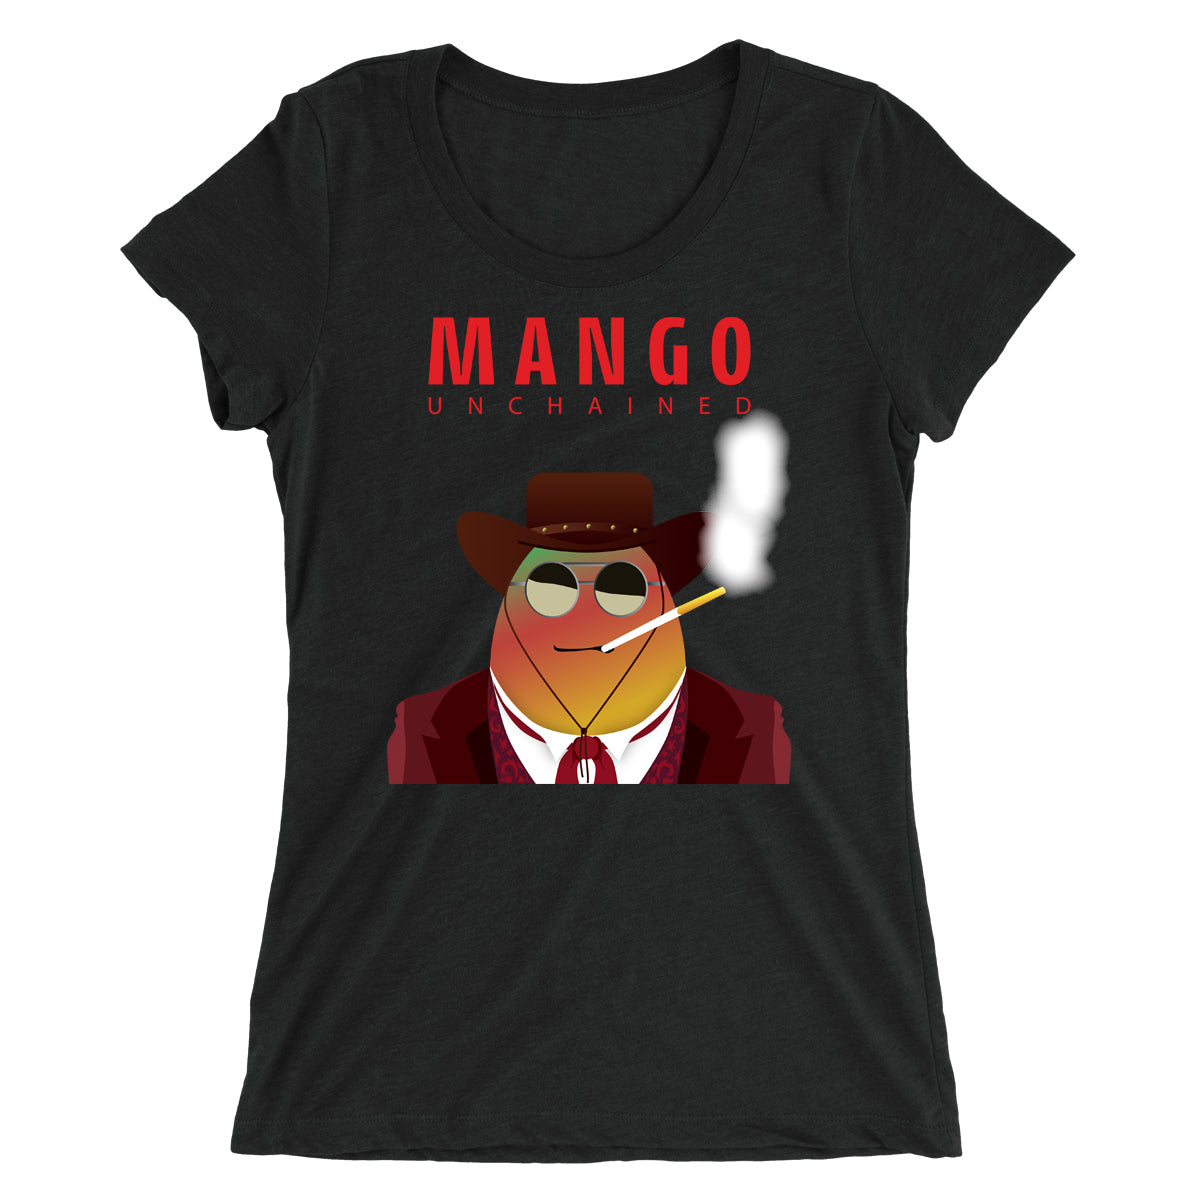 Movie The Food - Mango Unchained Women's T-Shirt - Black